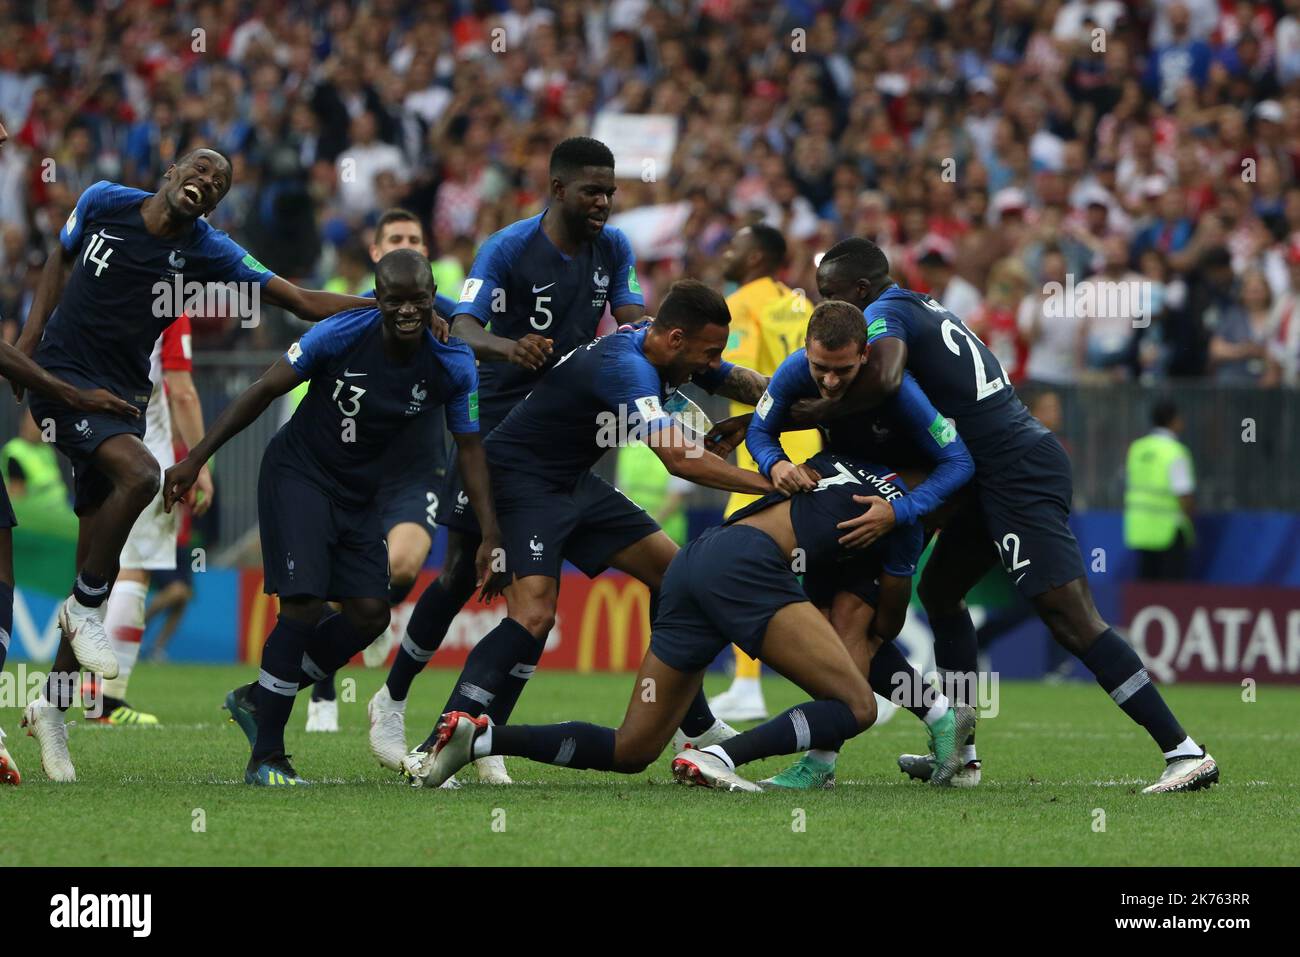 FIFA World Cup Russia 2018, Final Football Match France versus Croatia, France is the new World Champion. France won the World Cup for the second time 4-2 against Croatia. Pictured: French players, Blaise Matuidi, Antoine Griezmann, Samuel Umtiti, Antoine Griezmann and Team mates © Pierre Teyssot / Maxppp Stock Photo